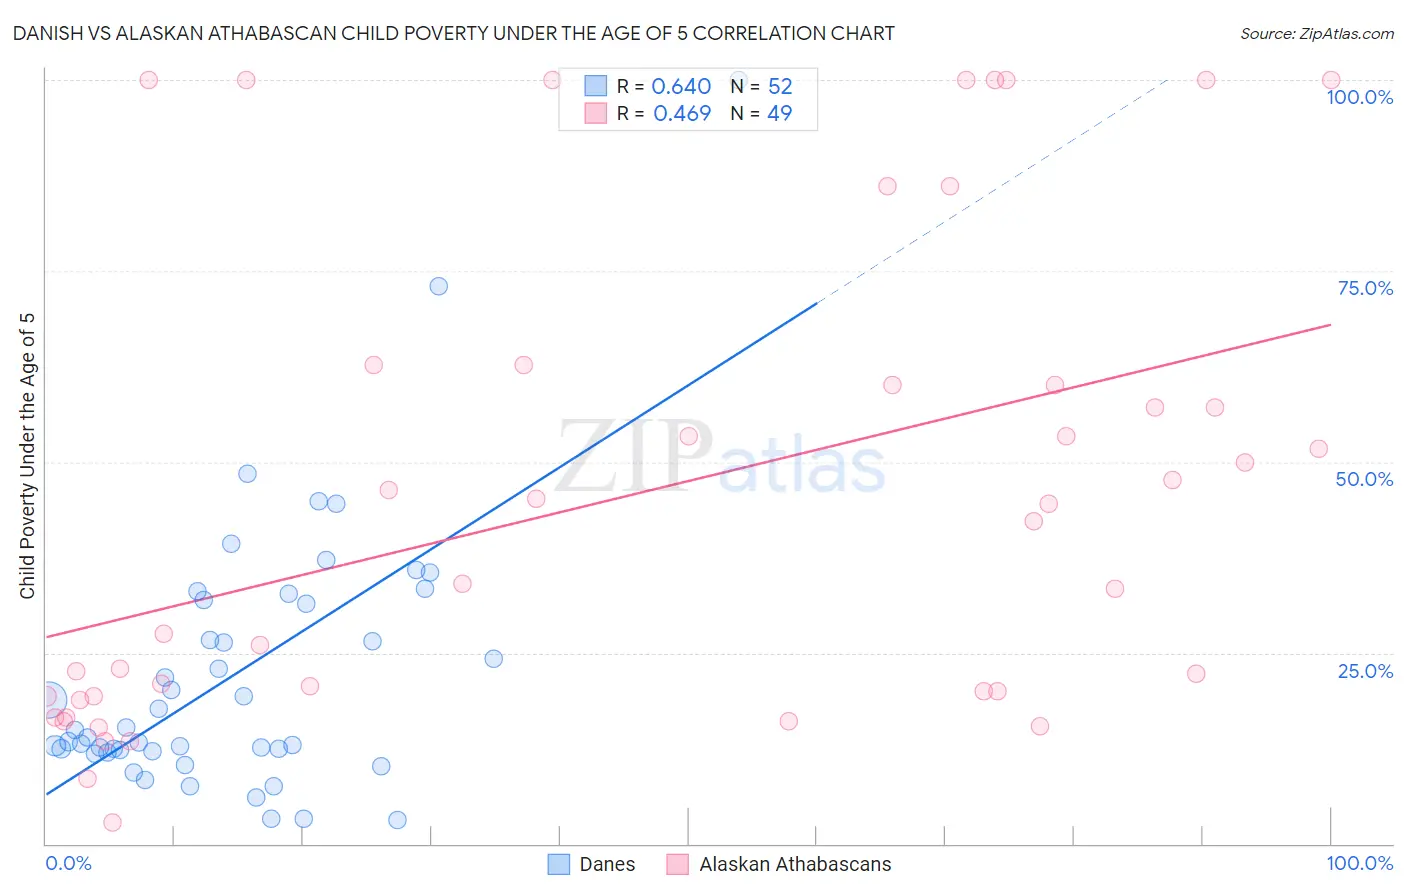 Danish vs Alaskan Athabascan Child Poverty Under the Age of 5